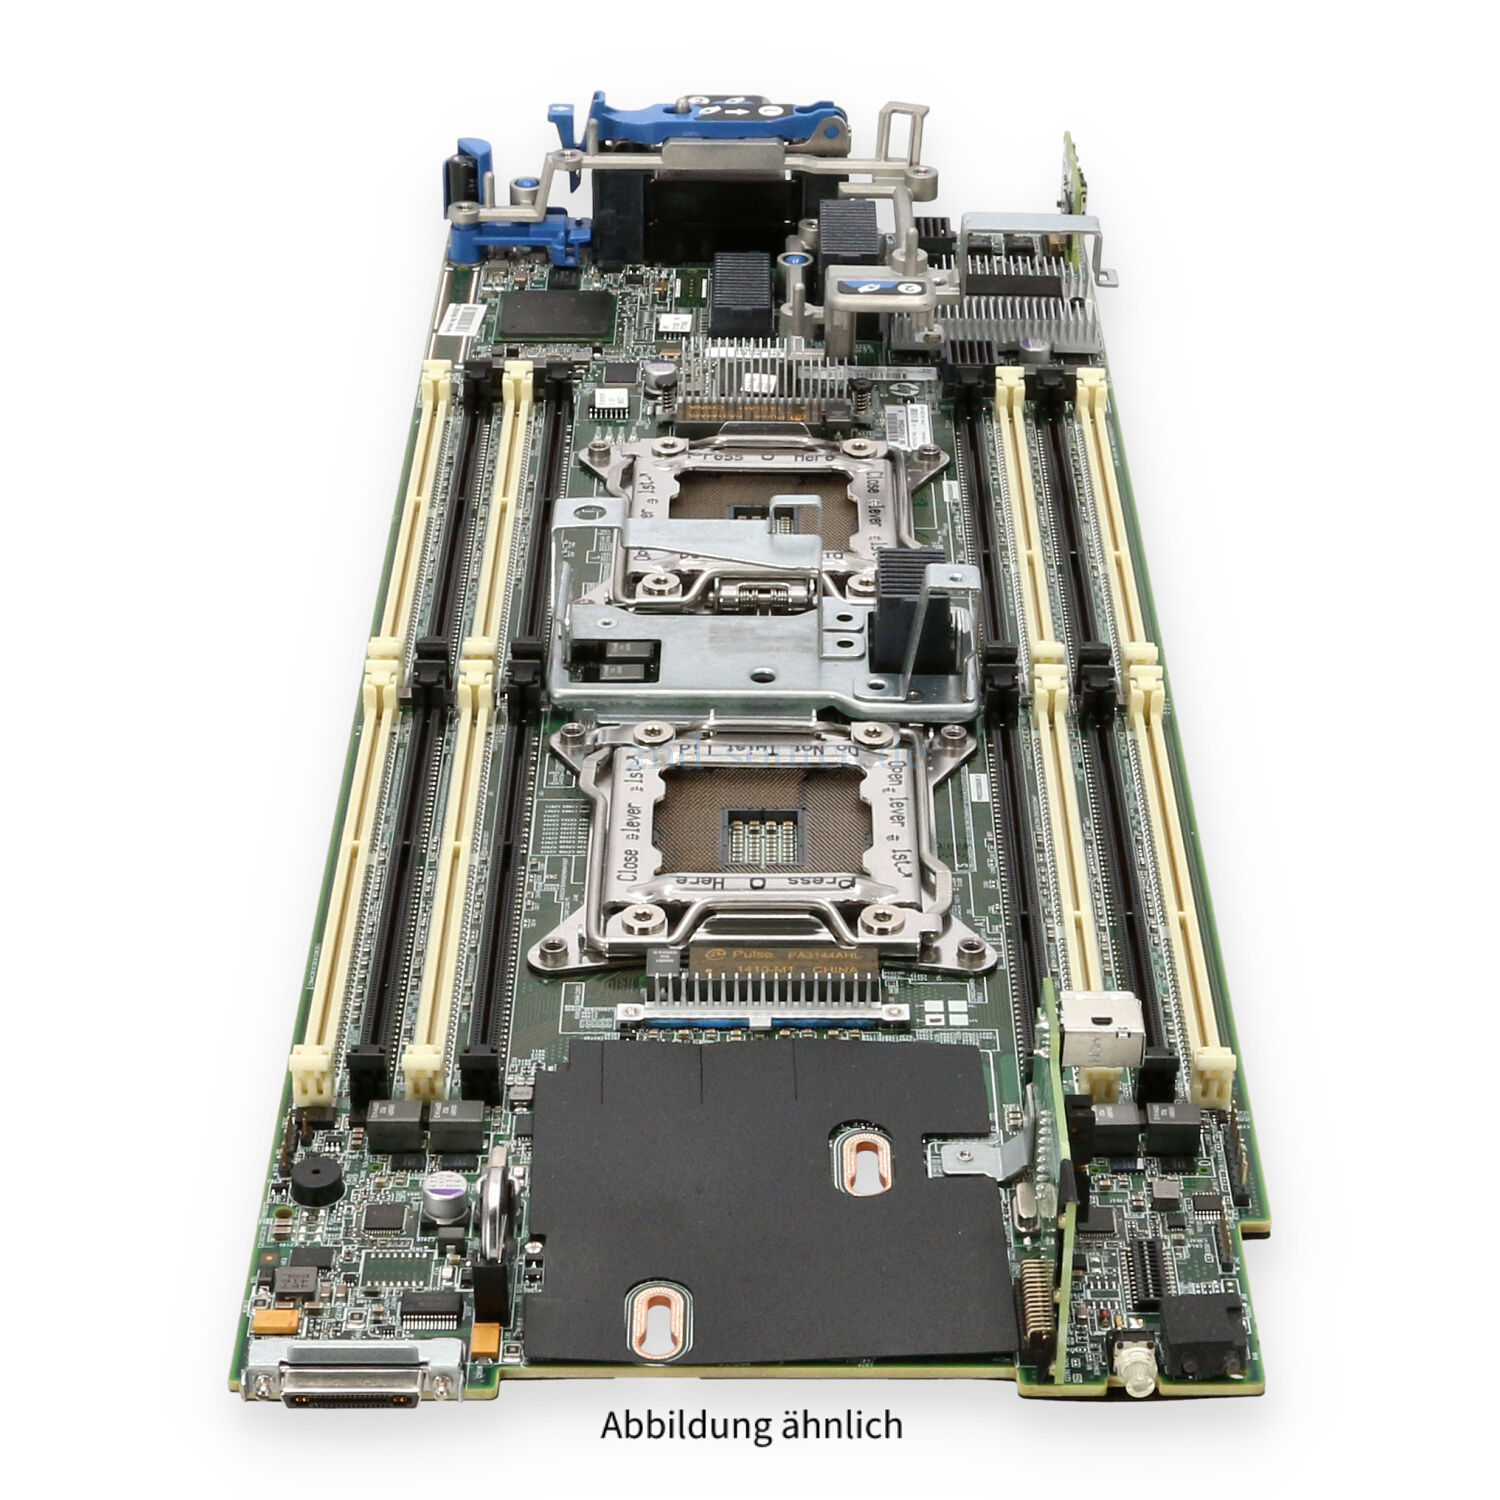 HPE Systemboard BL460c G8 861505-001